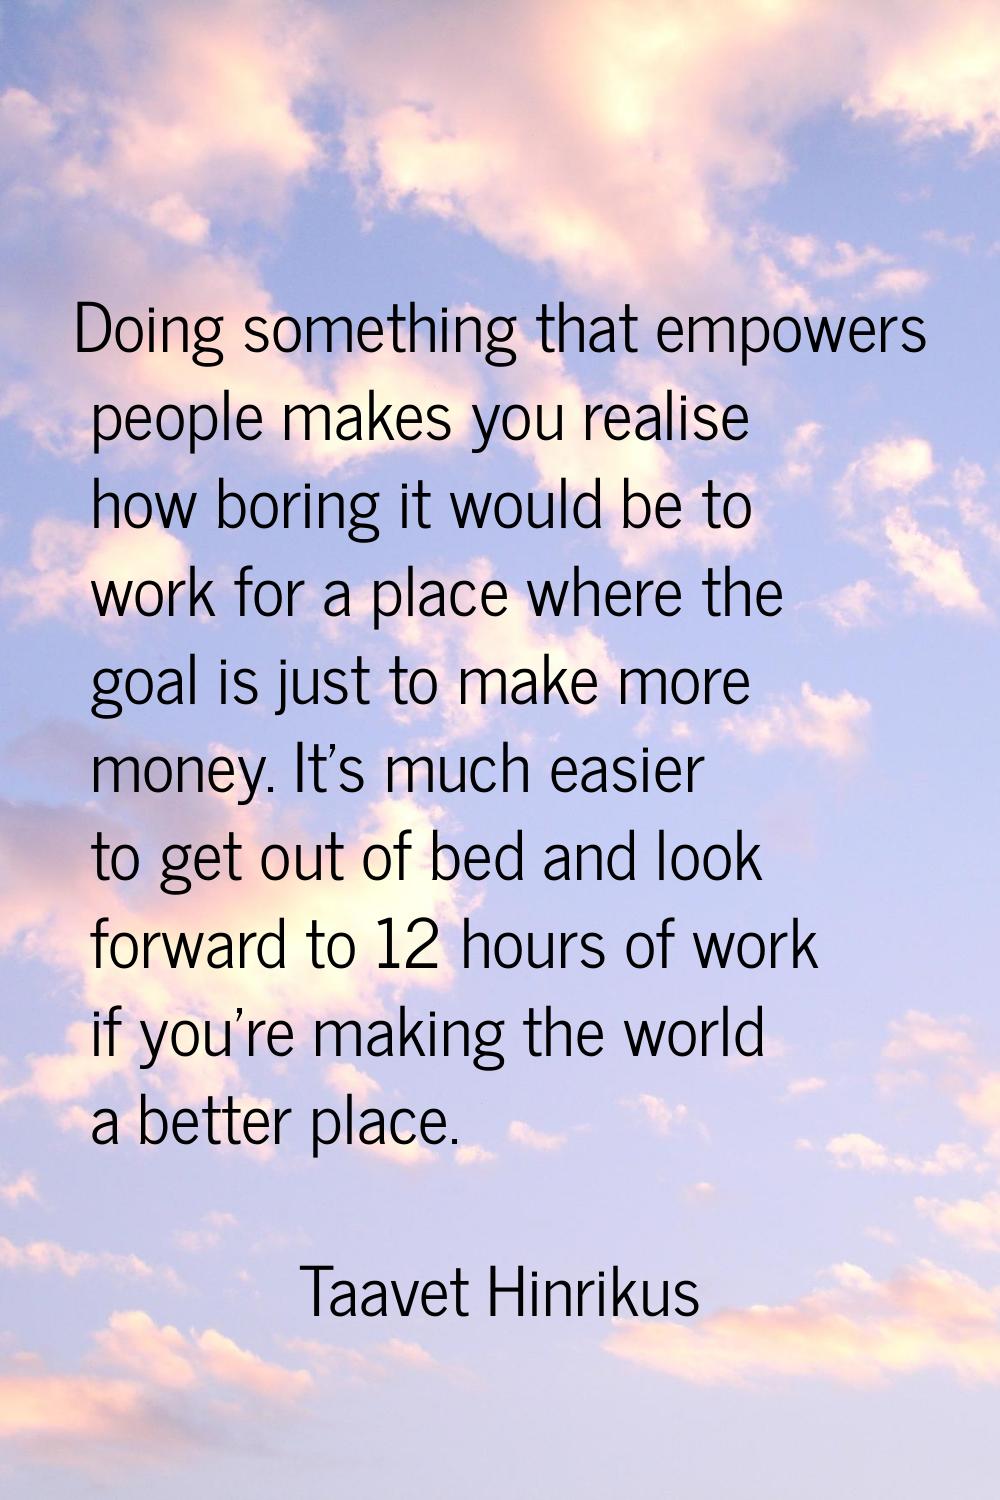 Doing something that empowers people makes you realise how boring it would be to work for a place w